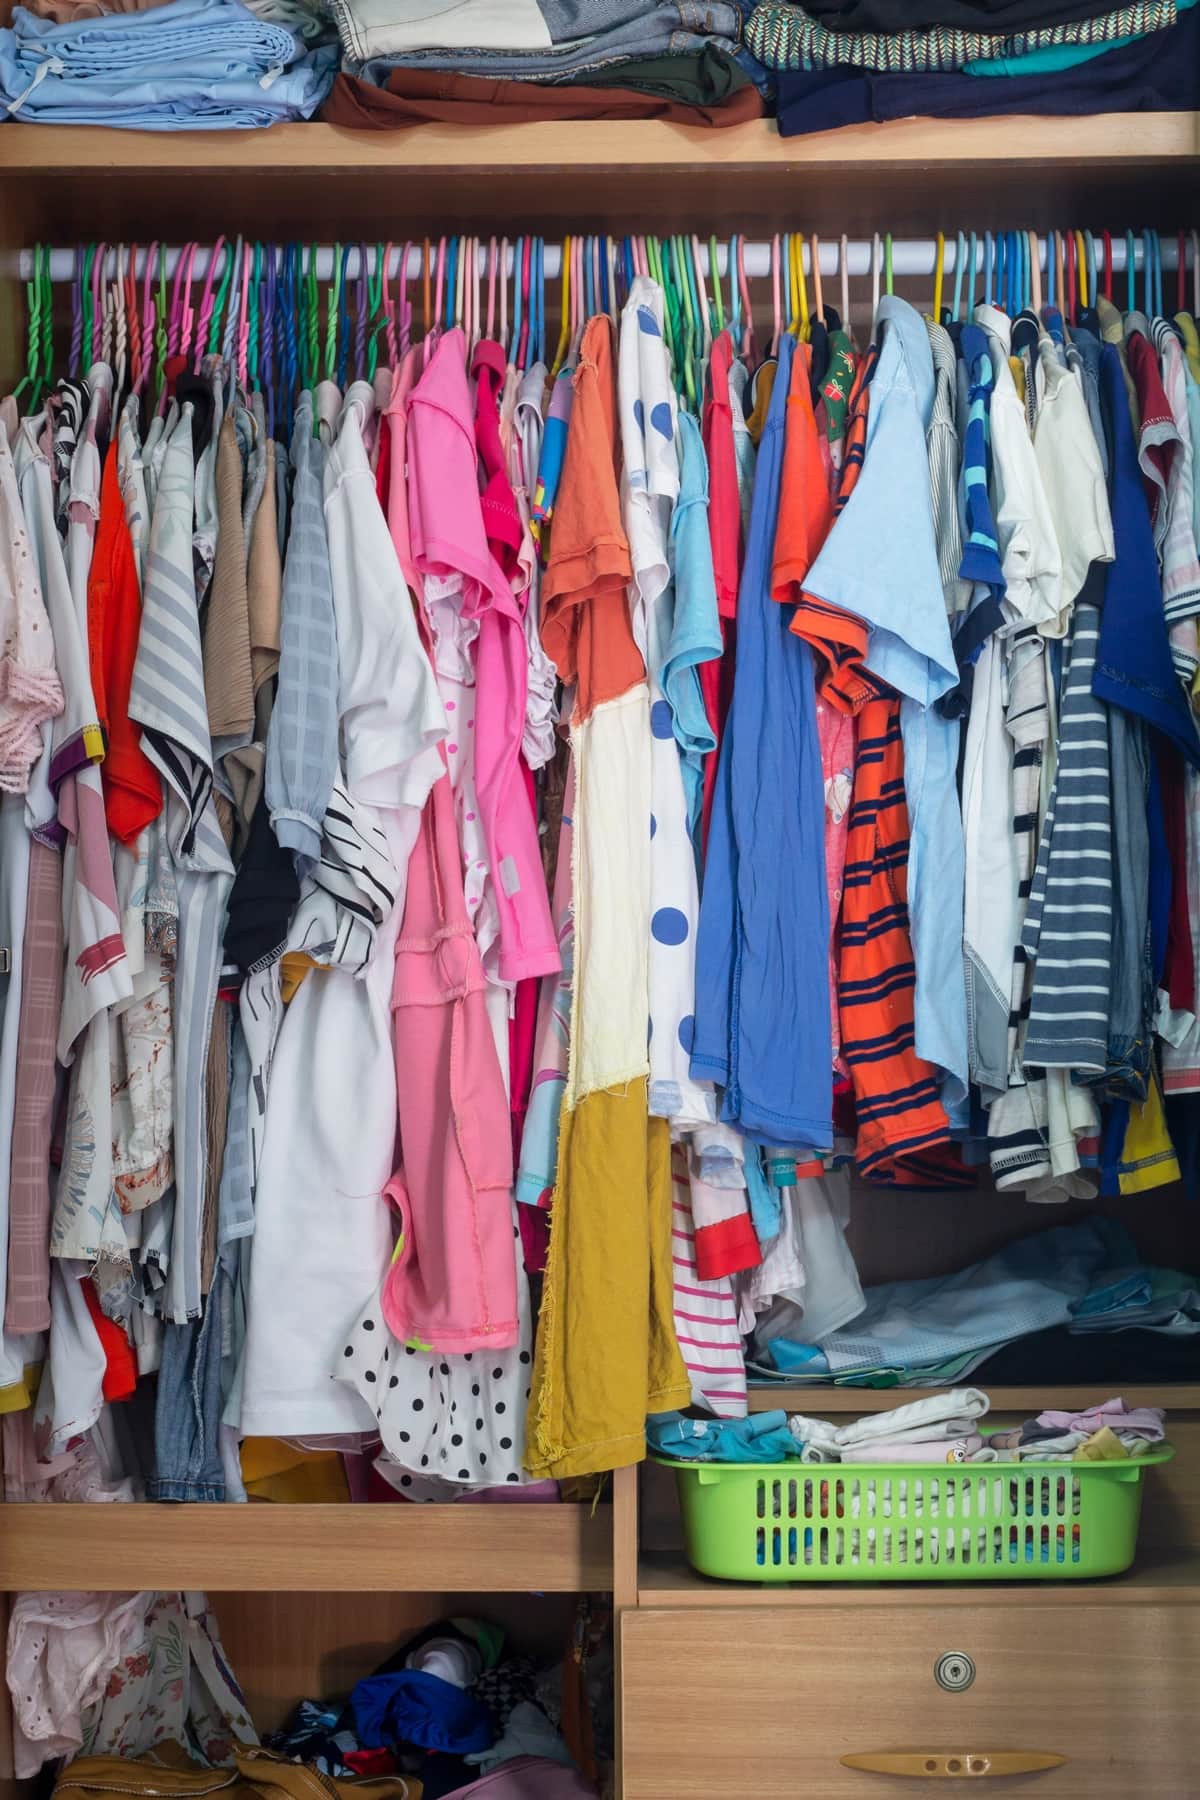 When your closet is overflowing with unused and old clothing, it's difficult to decide what to wear